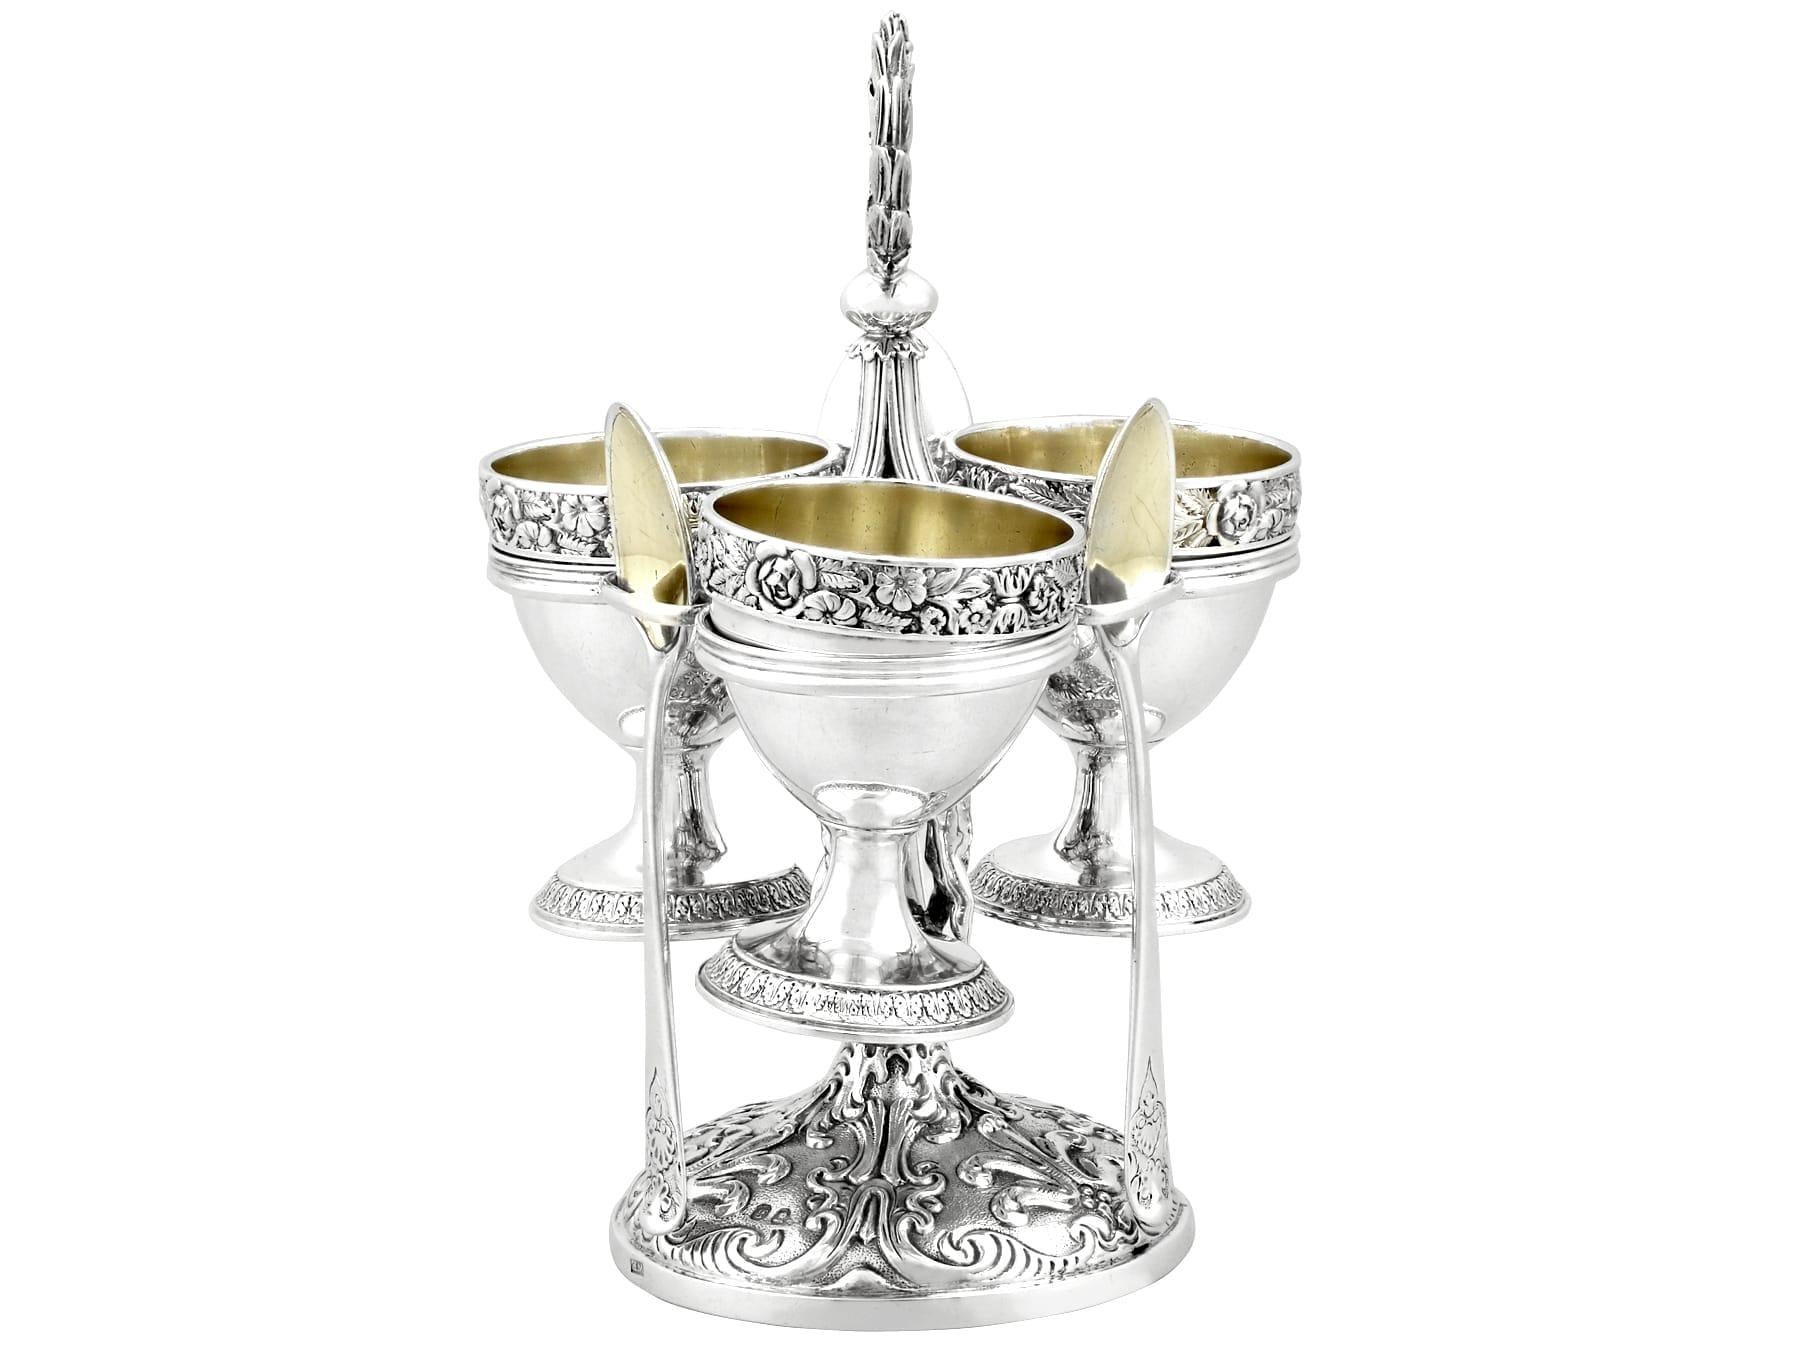 An exceptional, fine and impressive, antique George IV English sterling silver egg cruet set for three persons; part of our dining silverware collection.

This exceptional antique George IV sterling silver egg cruet set consists of three egg cups